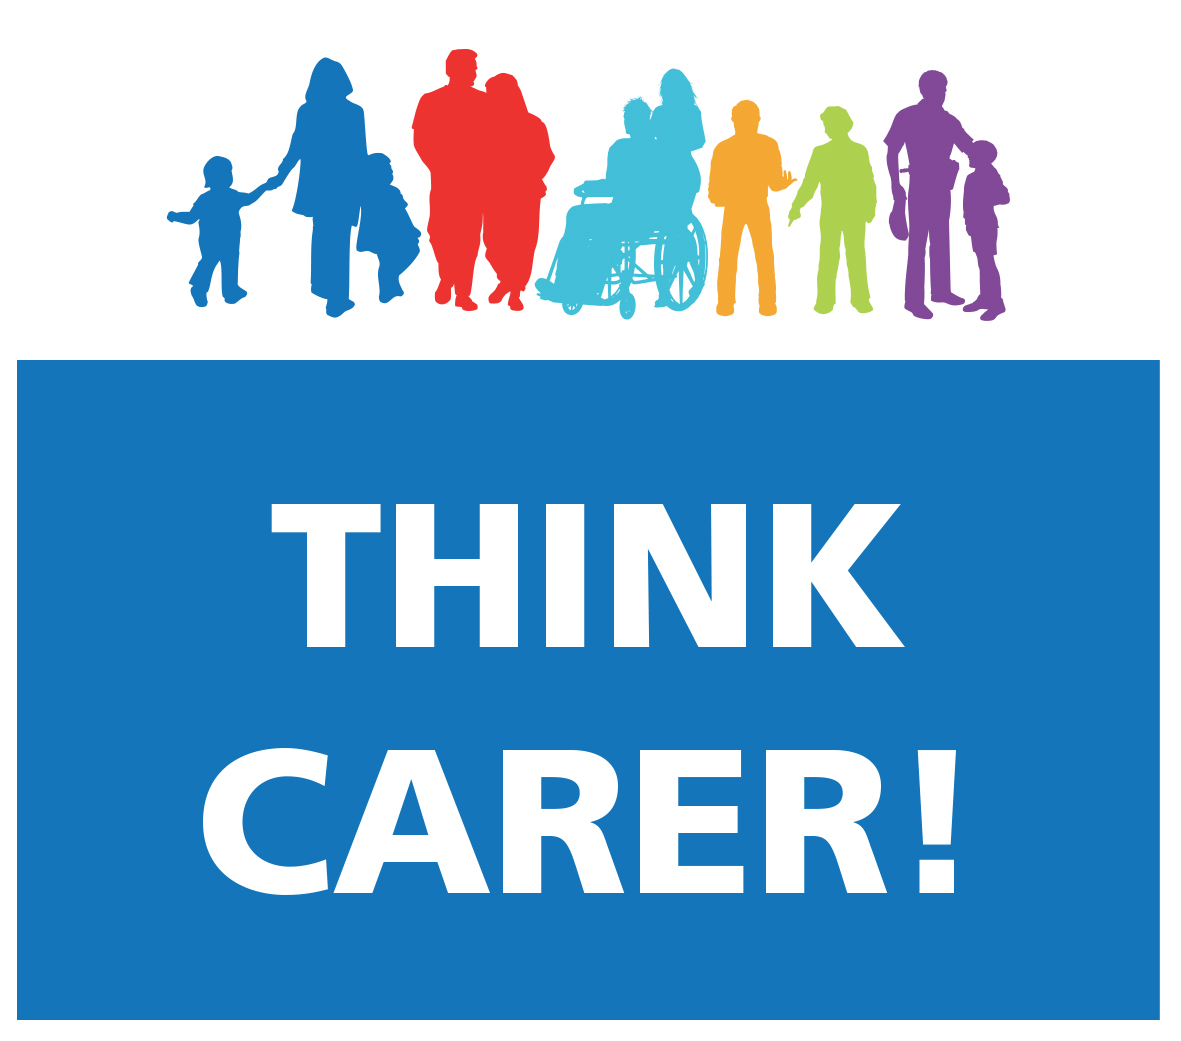 It's the final day of #CarersWeek Remember #THINKCARER…
Care Training & Consultancy CIC
@RelScotDG
@Quarriers
@alzscot
@changemh_
#DGCarers
@thirdsectordg
@dgcouncil